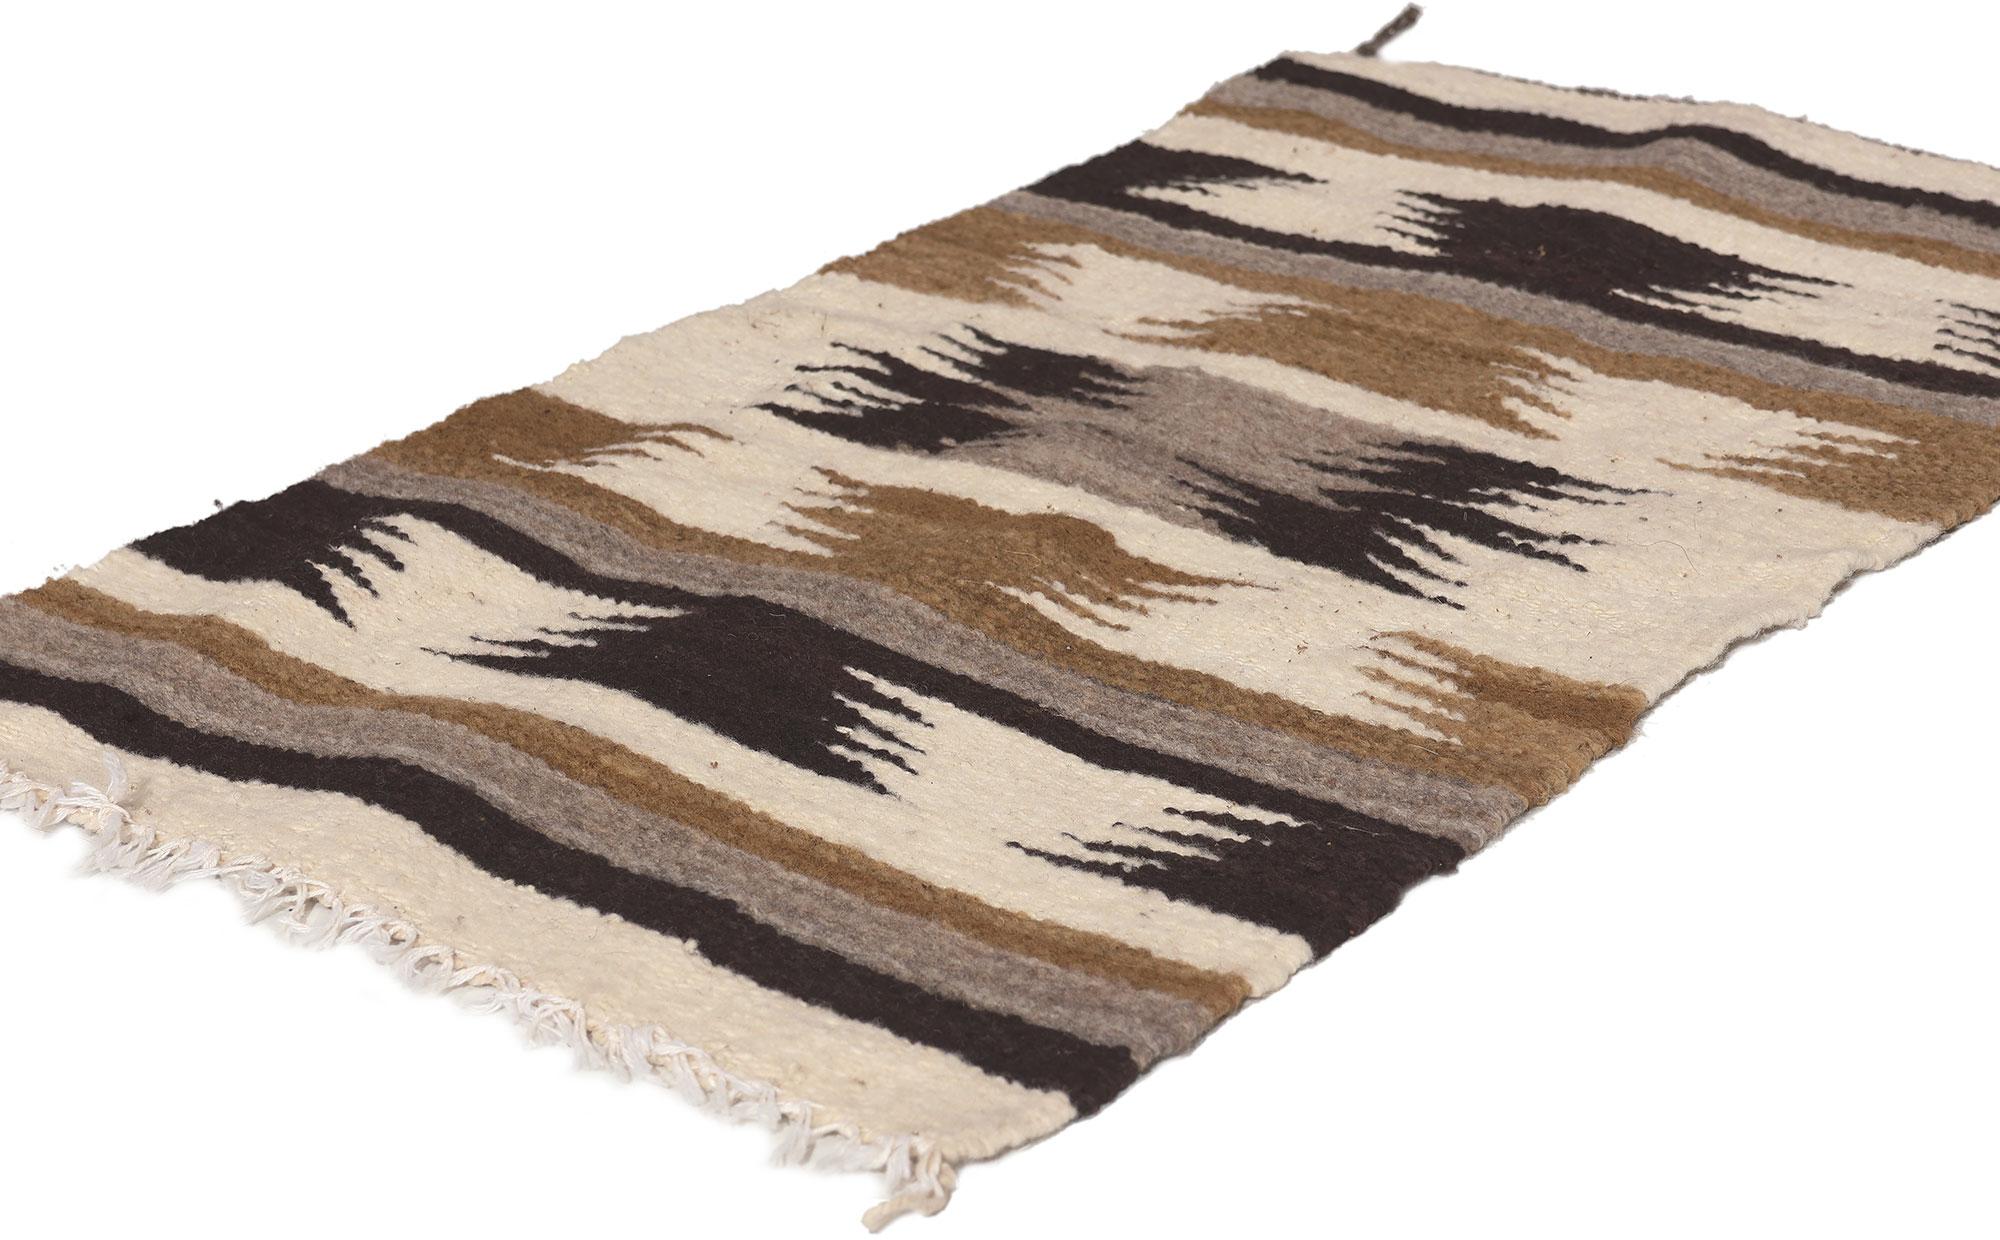 78632 Vintage Ganado Navajo Rug, 01'07 x 02'11.
Earthy Southwestern meets luxury lodge in this handwoven Navajo rug. The eye-catching Ganado design and neutral earthy colorway woven into this piece work together to evoke a subtle Southwest look. The